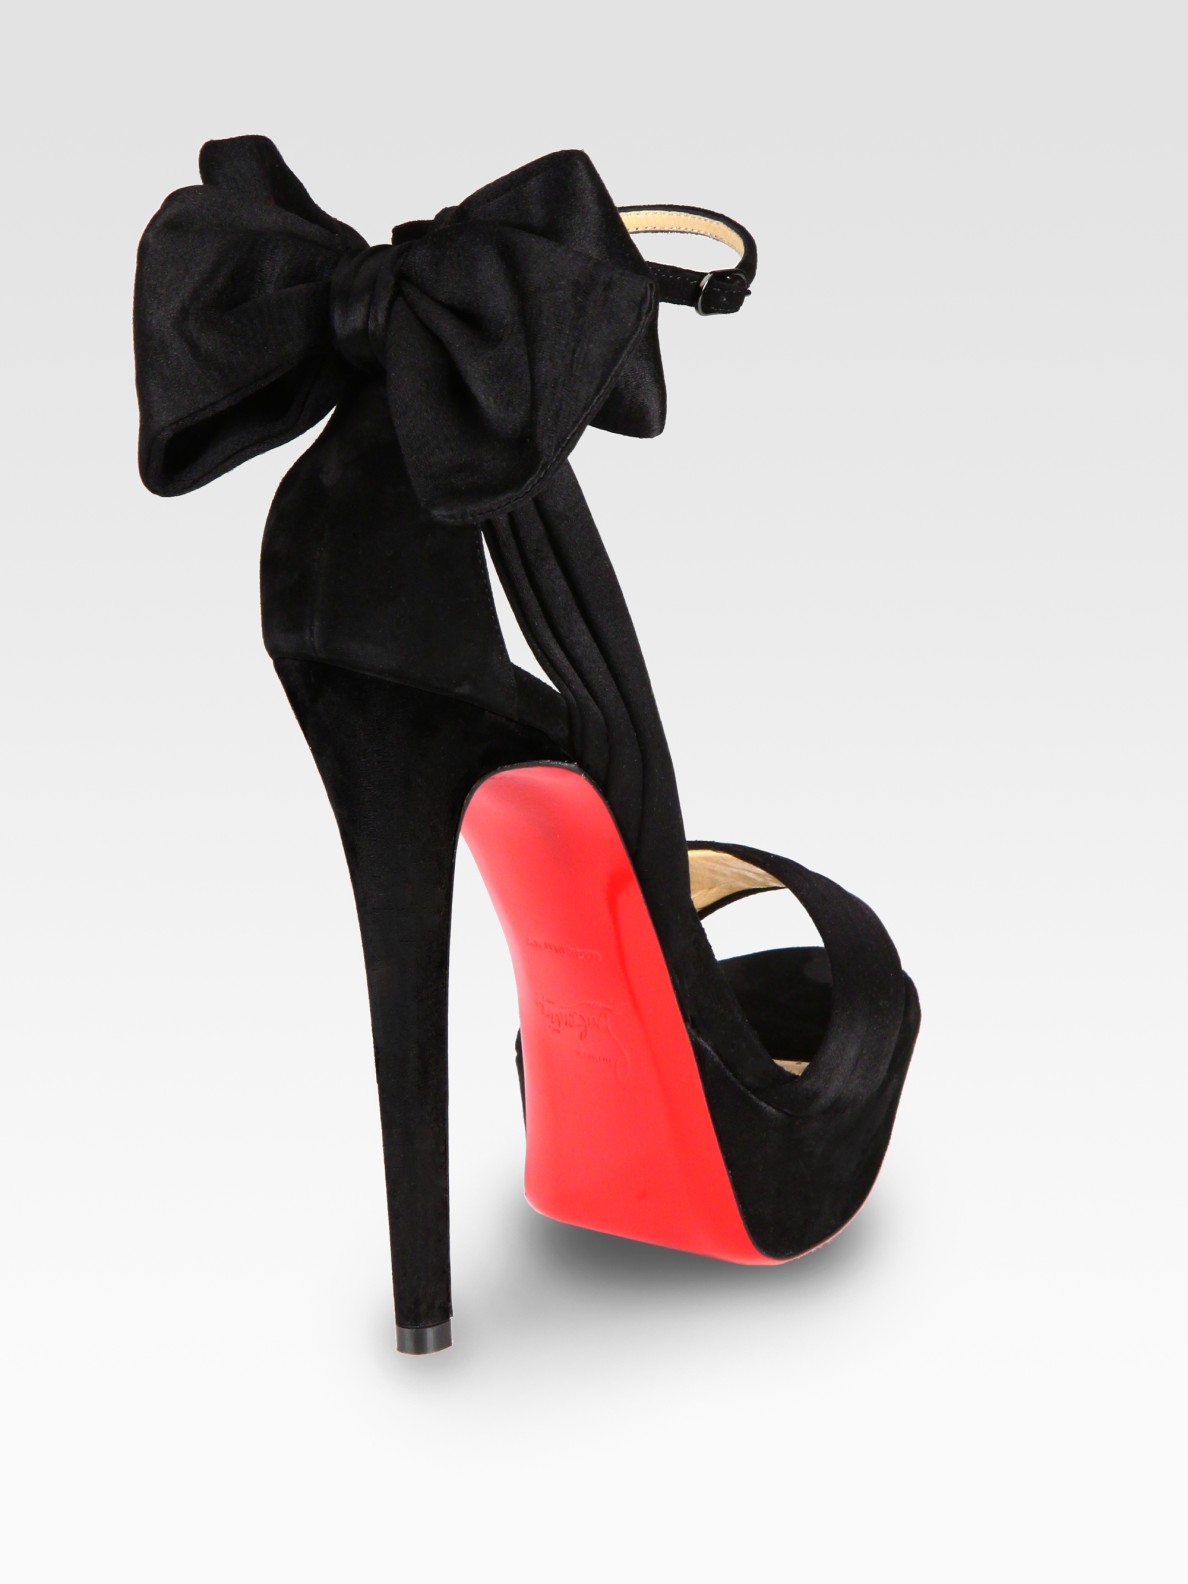 Christian Louboutin Satin and Suede Bow Platform Sandals in Black - Lyst